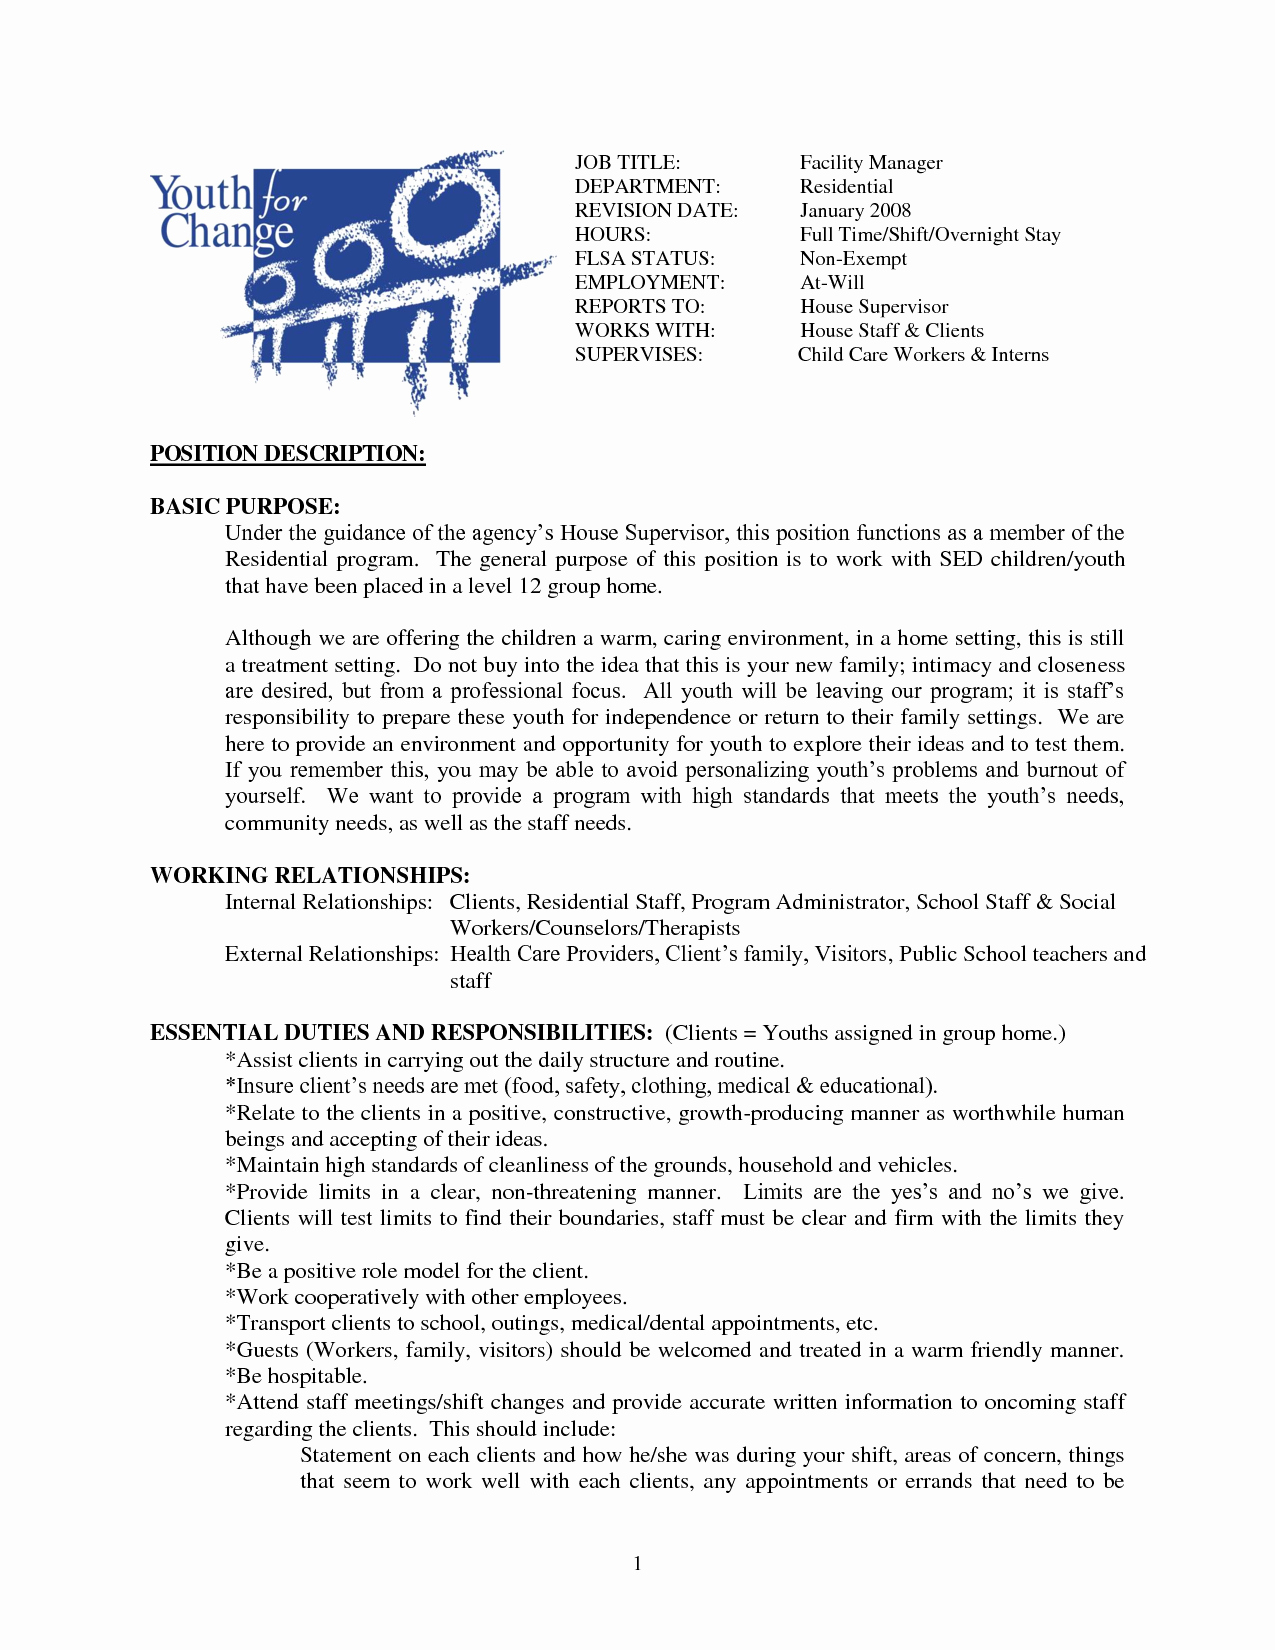 10 house cleaning resume example